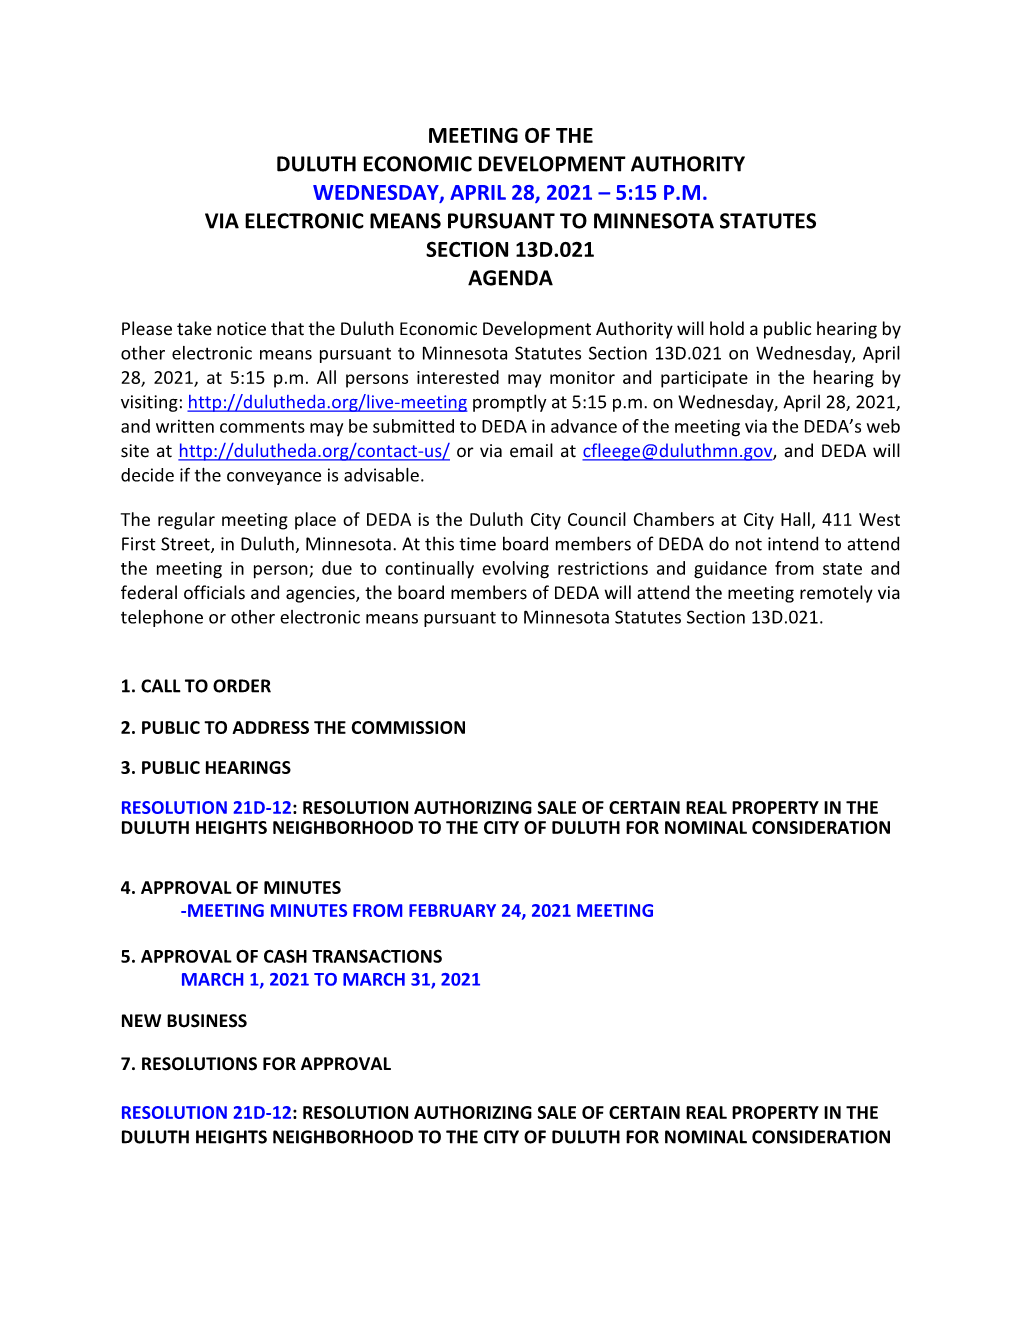 Meeting of the Duluth Economic Development Authority Wednesday, April 28, 2021 – 5:15 P.M